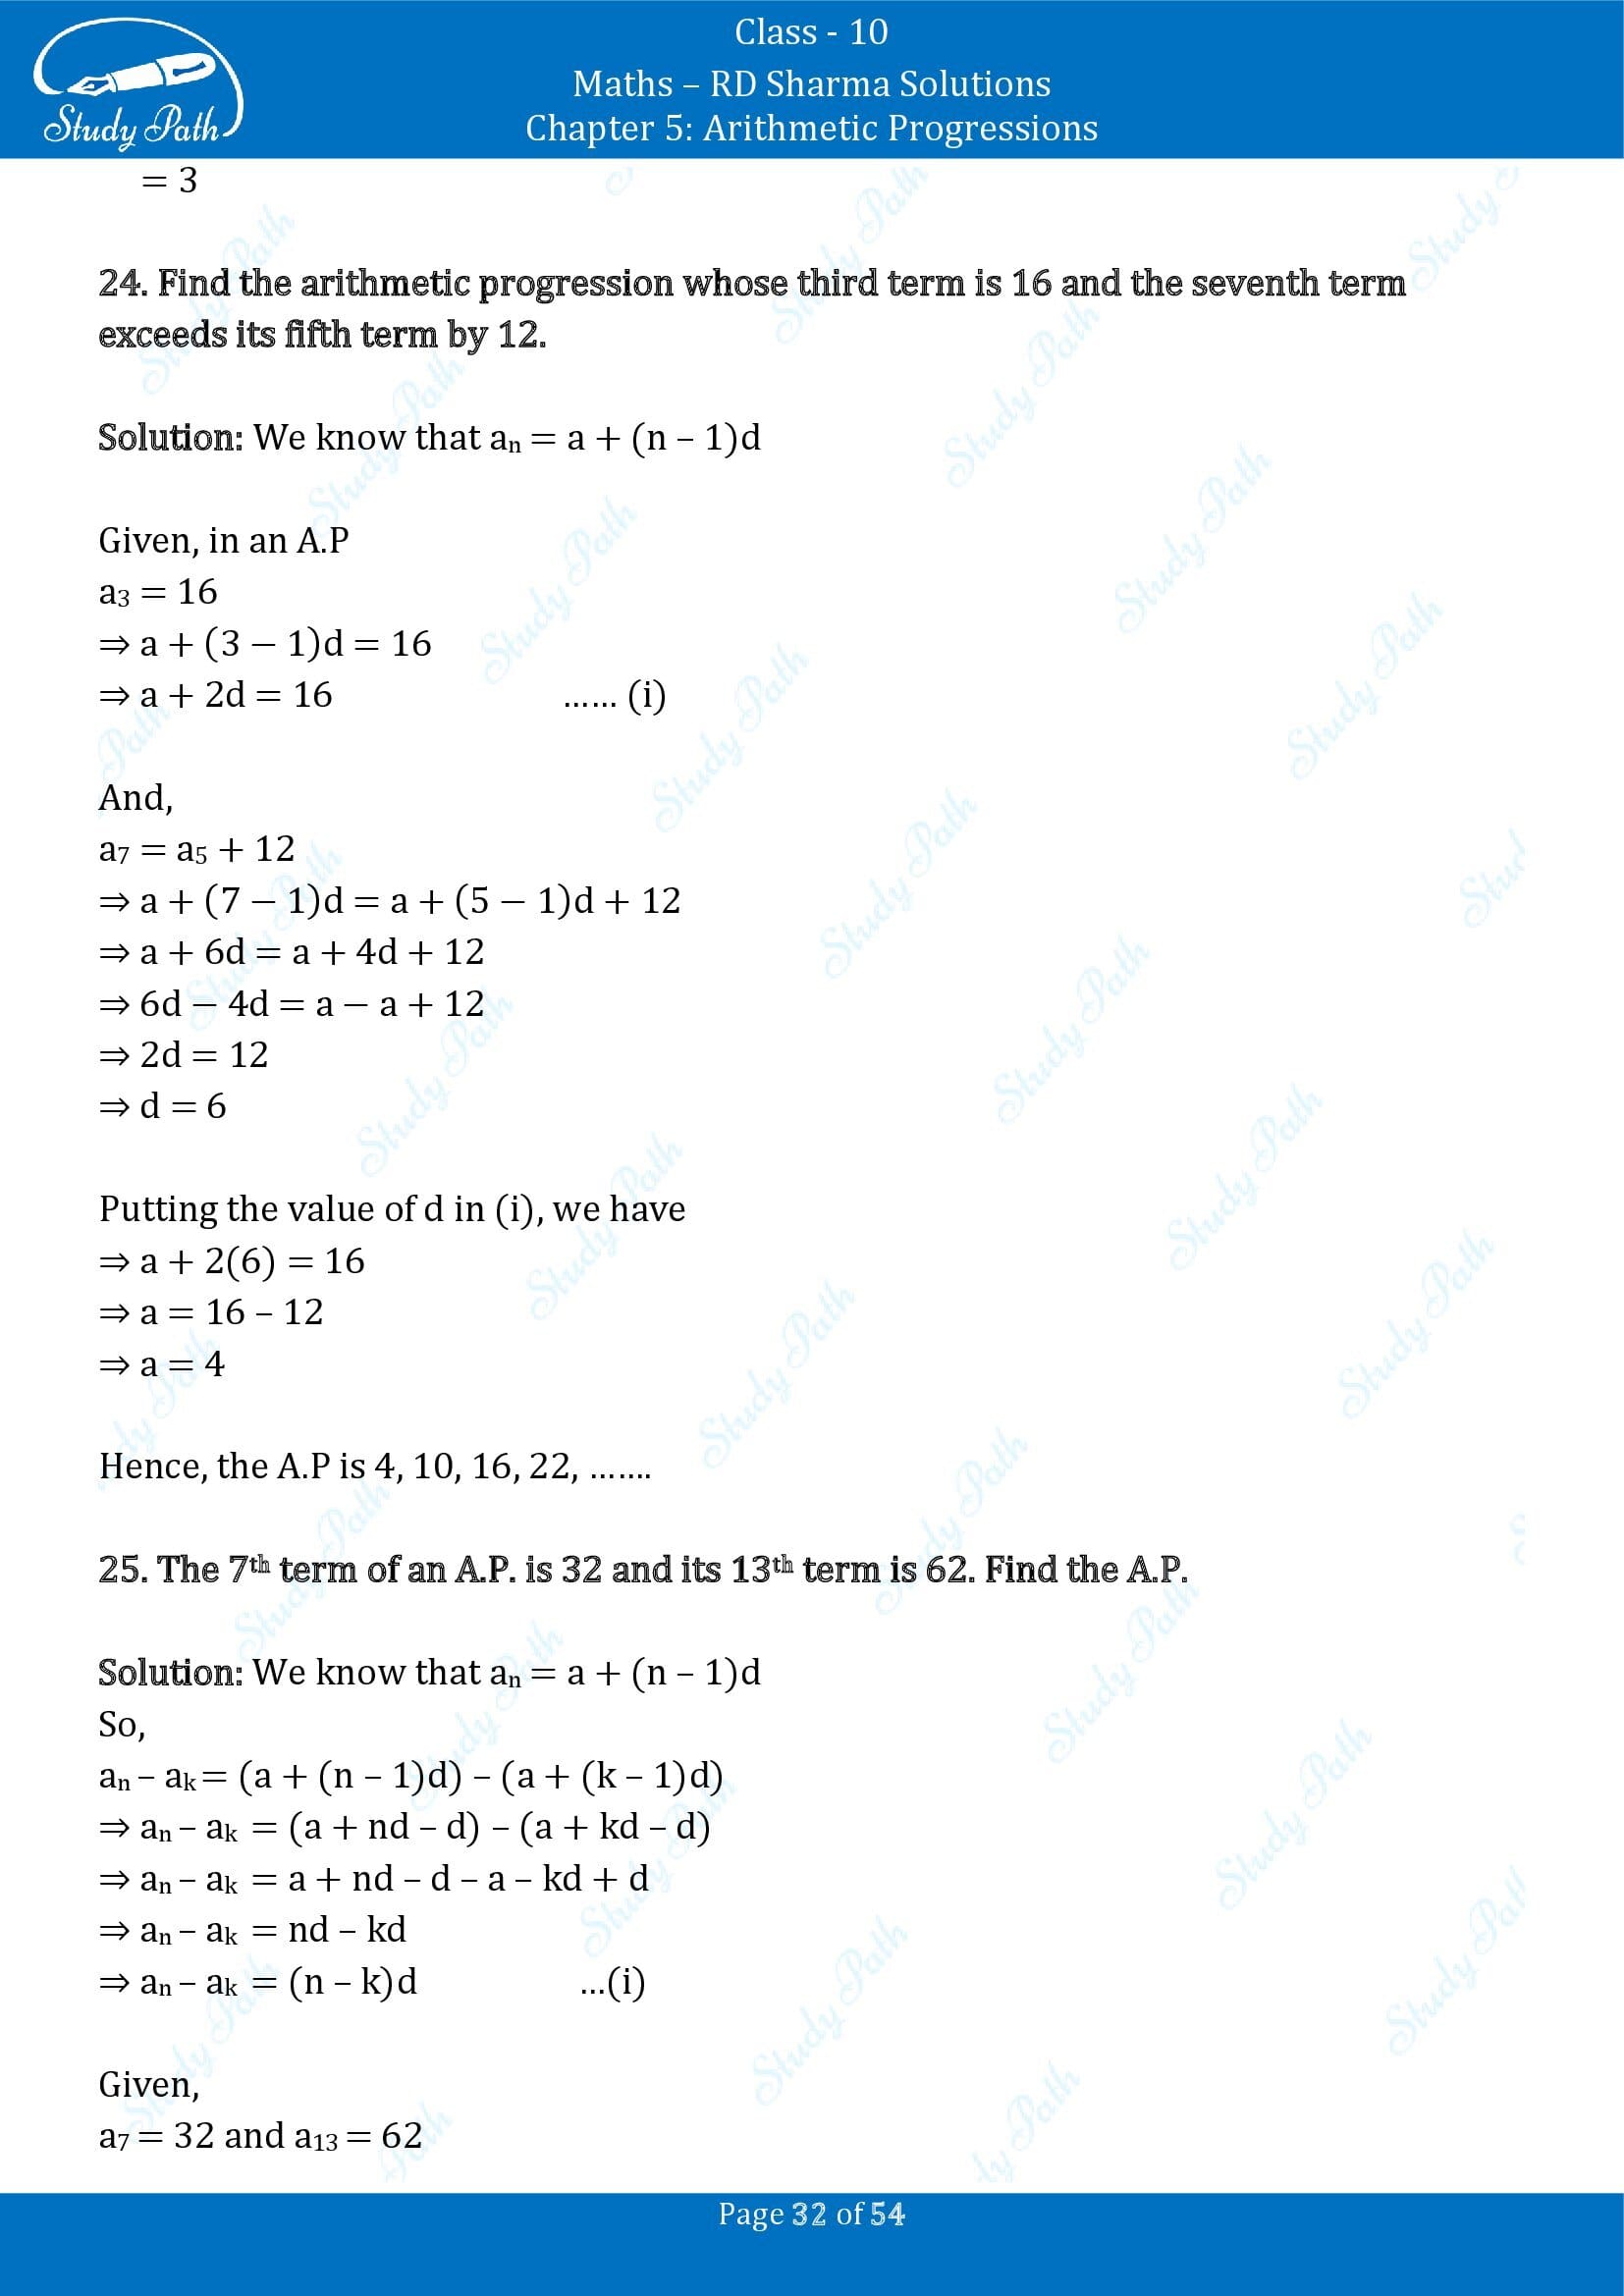 RD Sharma Solutions Class 10 Chapter 5 Arithmetic Progressions Exercise 5.4 00032